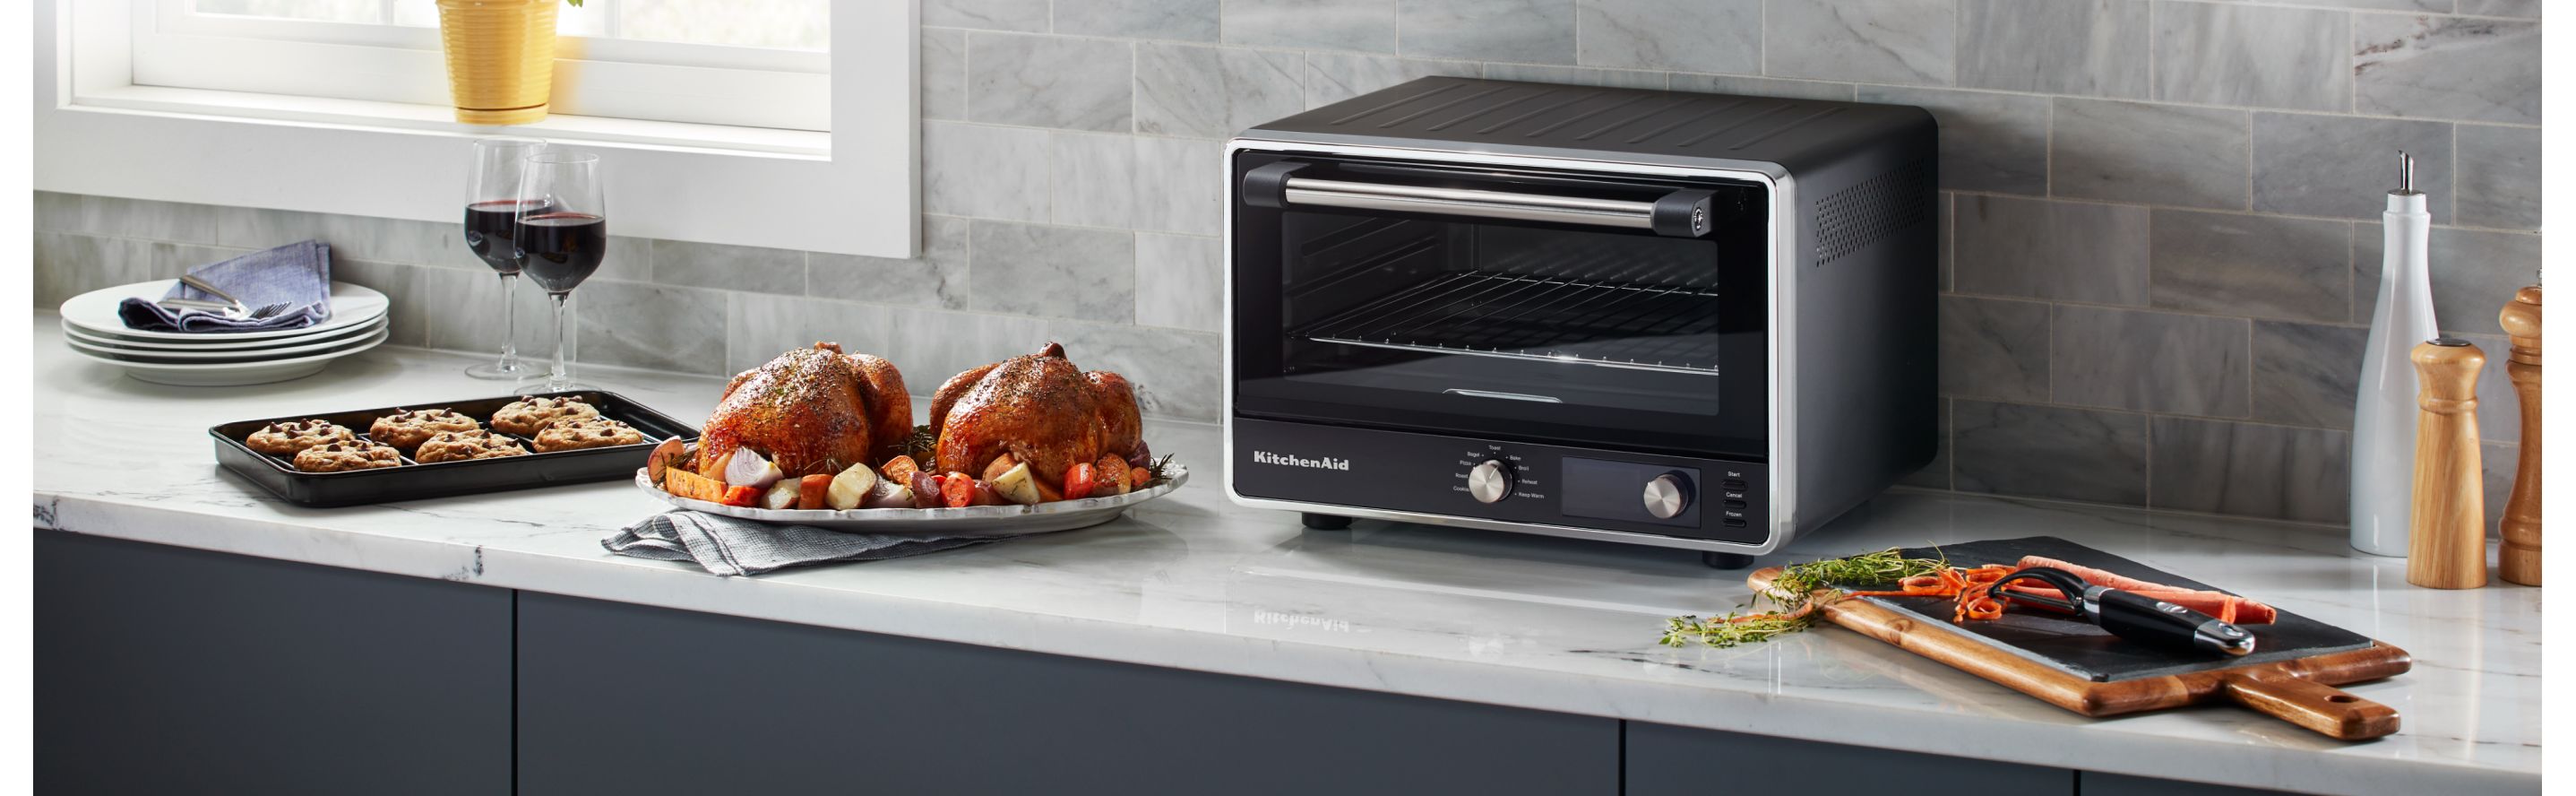 Valkuilen Toestemming Perceptie Toaster Oven vs. Countertop Oven: What's the Difference? | KitchenAid